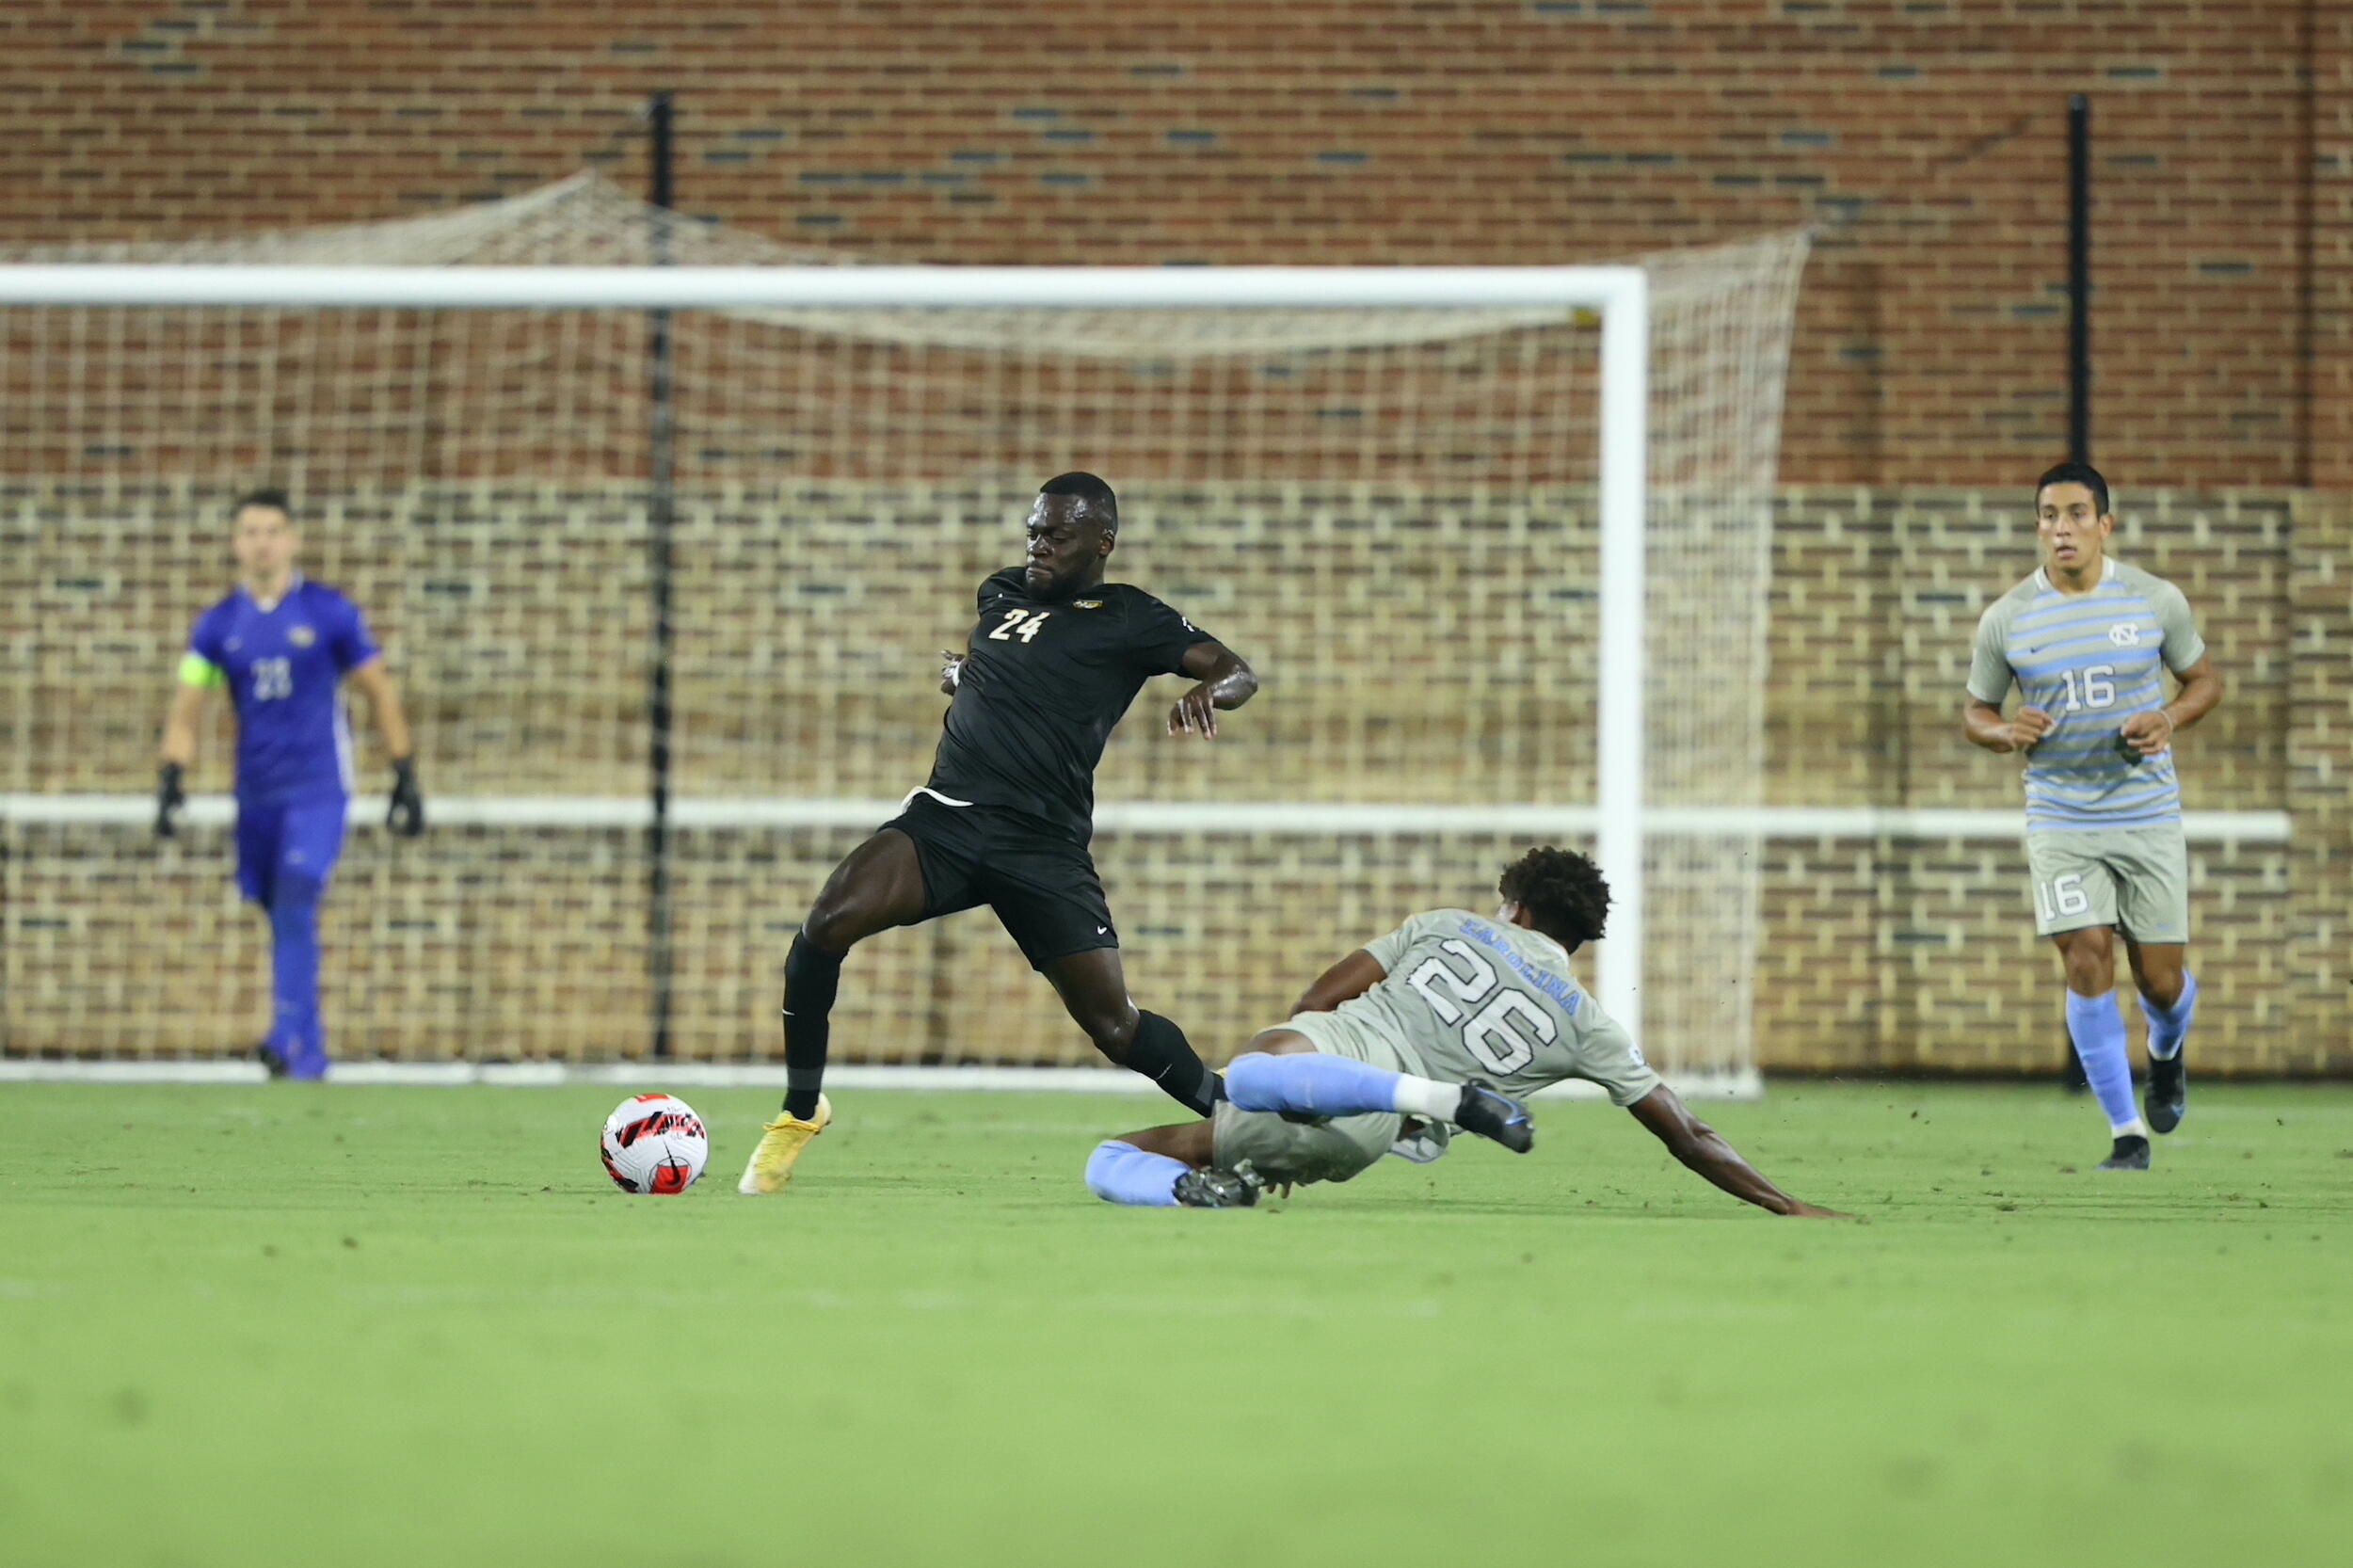 Andy Mensah fights for possession during VCU's soccer game against the University of North Carolina.